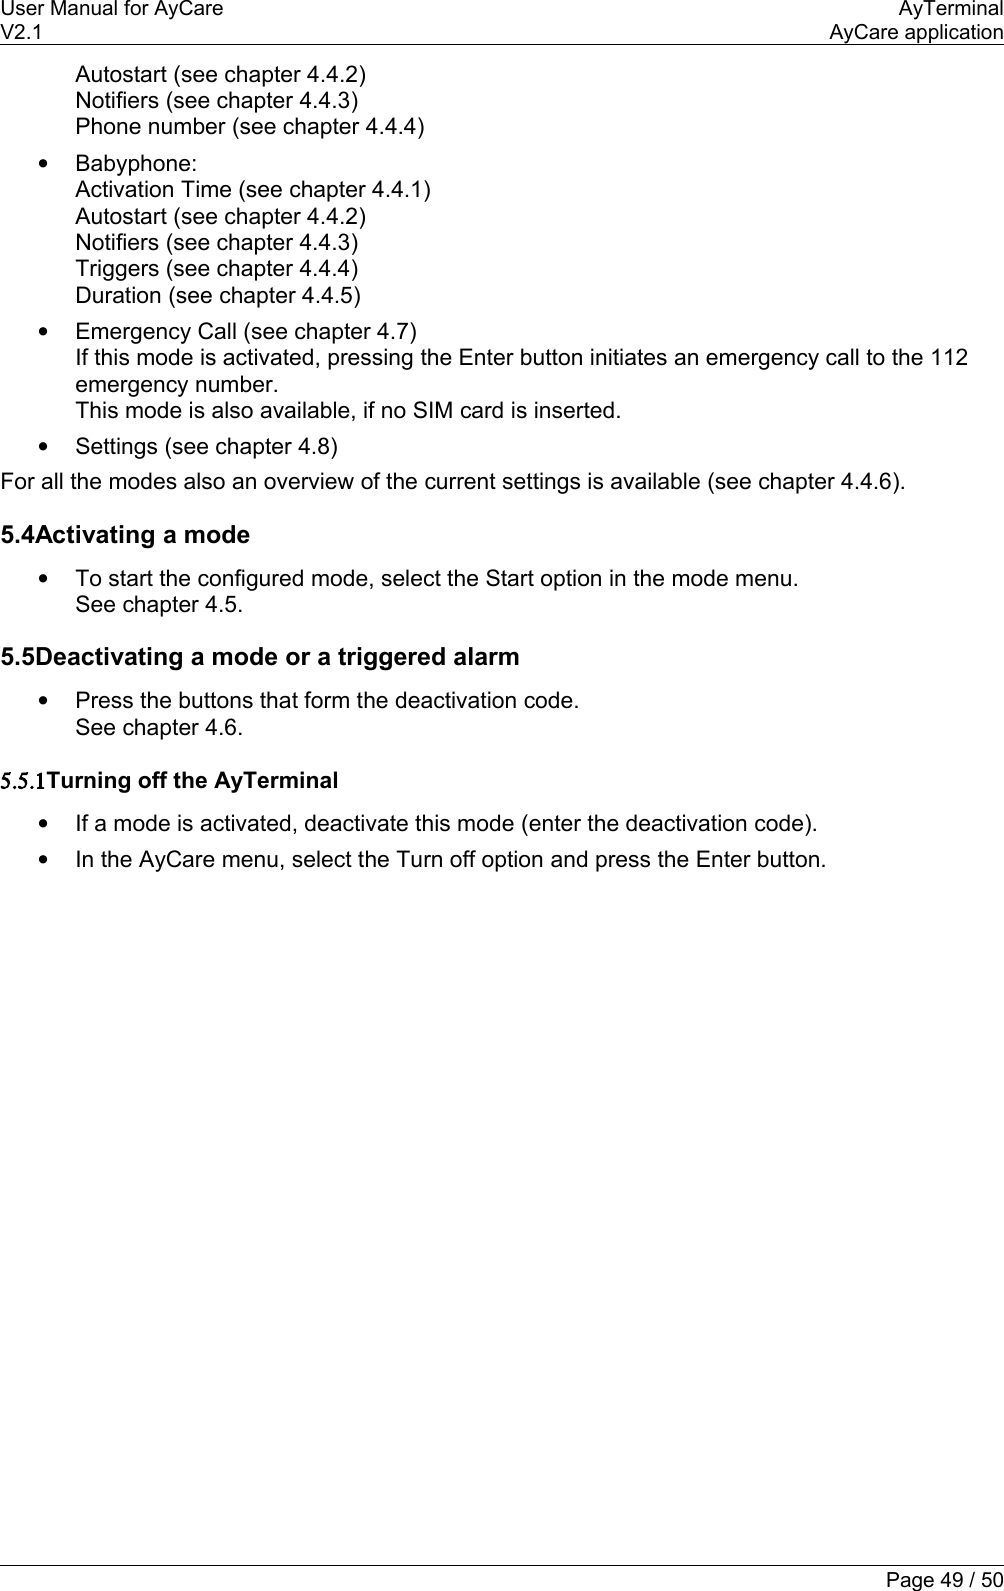 User Manual for AyCare AyTerminalV2.1 AyCare applicationAutostart (see chapter 4.4.2)Notifiers (see chapter 4.4.3)Phone number (see chapter 4.4.4)•Babyphone:Activation Time (see chapter 4.4.1)Autostart (see chapter 4.4.2)Notifiers (see chapter 4.4.3)Triggers (see chapter 4.4.4)Duration (see chapter 4.4.5)•Emergency Call (see chapter 4.7)If this mode is activated, pressing the Enter button initiates an emergency call to the 112 emergency number.This mode is also available, if no SIM card is inserted. •Settings (see chapter 4.8)For all the modes also an overview of the current settings is available (see chapter 4.4.6).5.4Activating a mode•To start the configured mode, select the Start option in the mode menu.See chapter 4.5.5.5Deactivating a mode or a triggered alarm•Press the buttons that form the deactivation code.See chapter 4.6.5.5.1Turning off the AyTerminal•If a mode is activated, deactivate this mode (enter the deactivation code).•In the AyCare menu, select the Turn off option and press the Enter button.Page 49 / 50